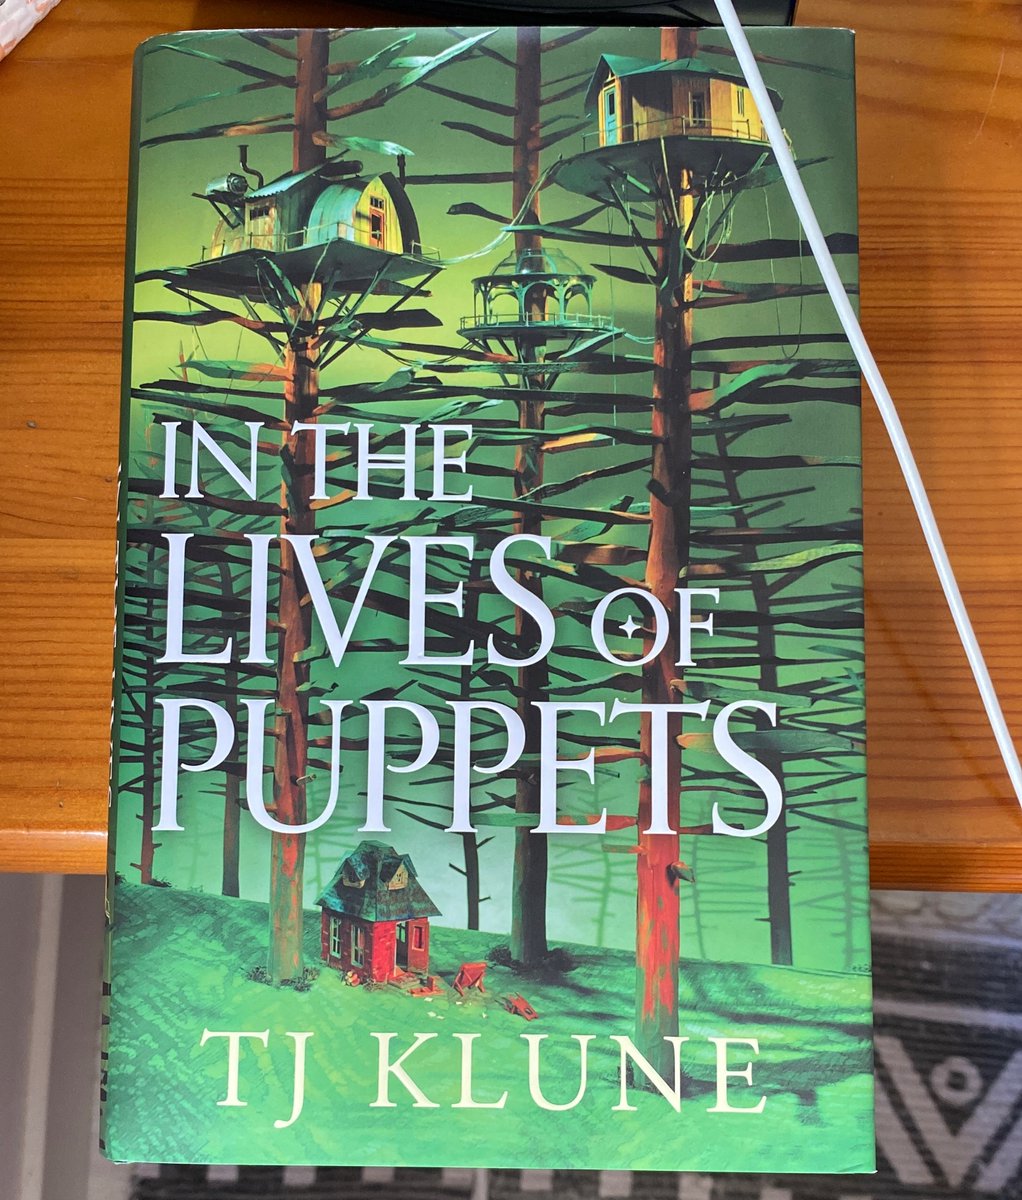 I see what you did here TJ Klune #InTheLivesOfPuppets #wolfsong